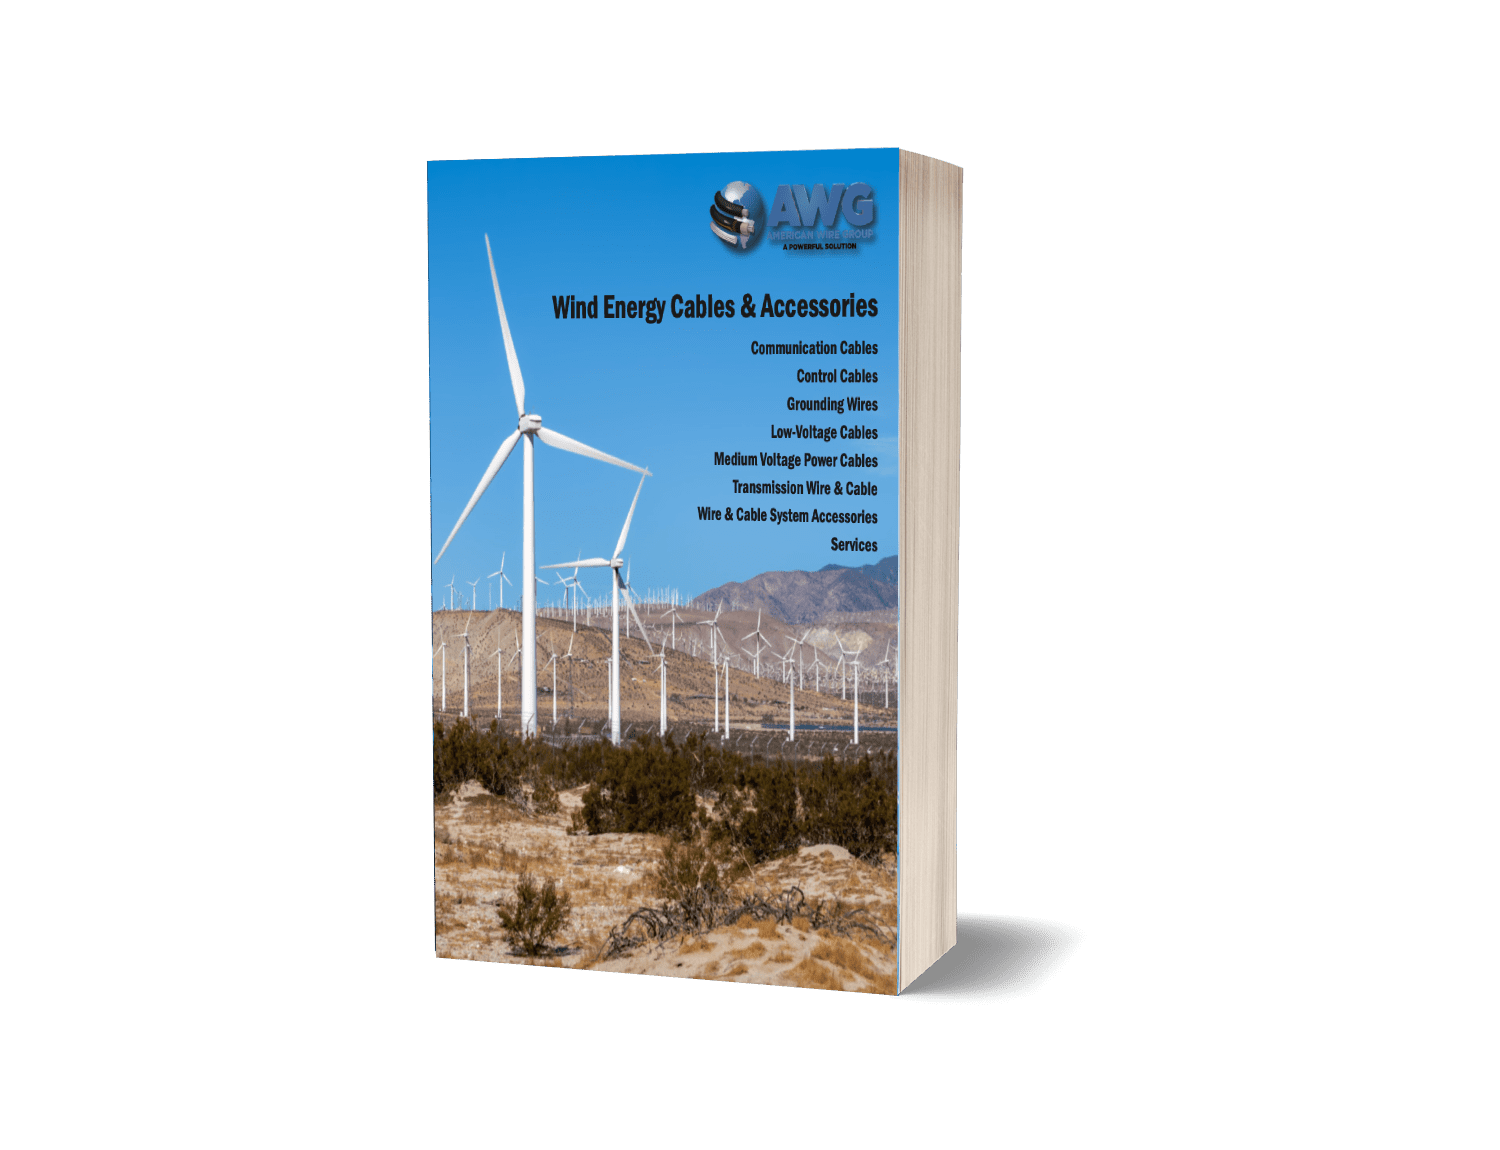 Wind Energy Cables & Accessories